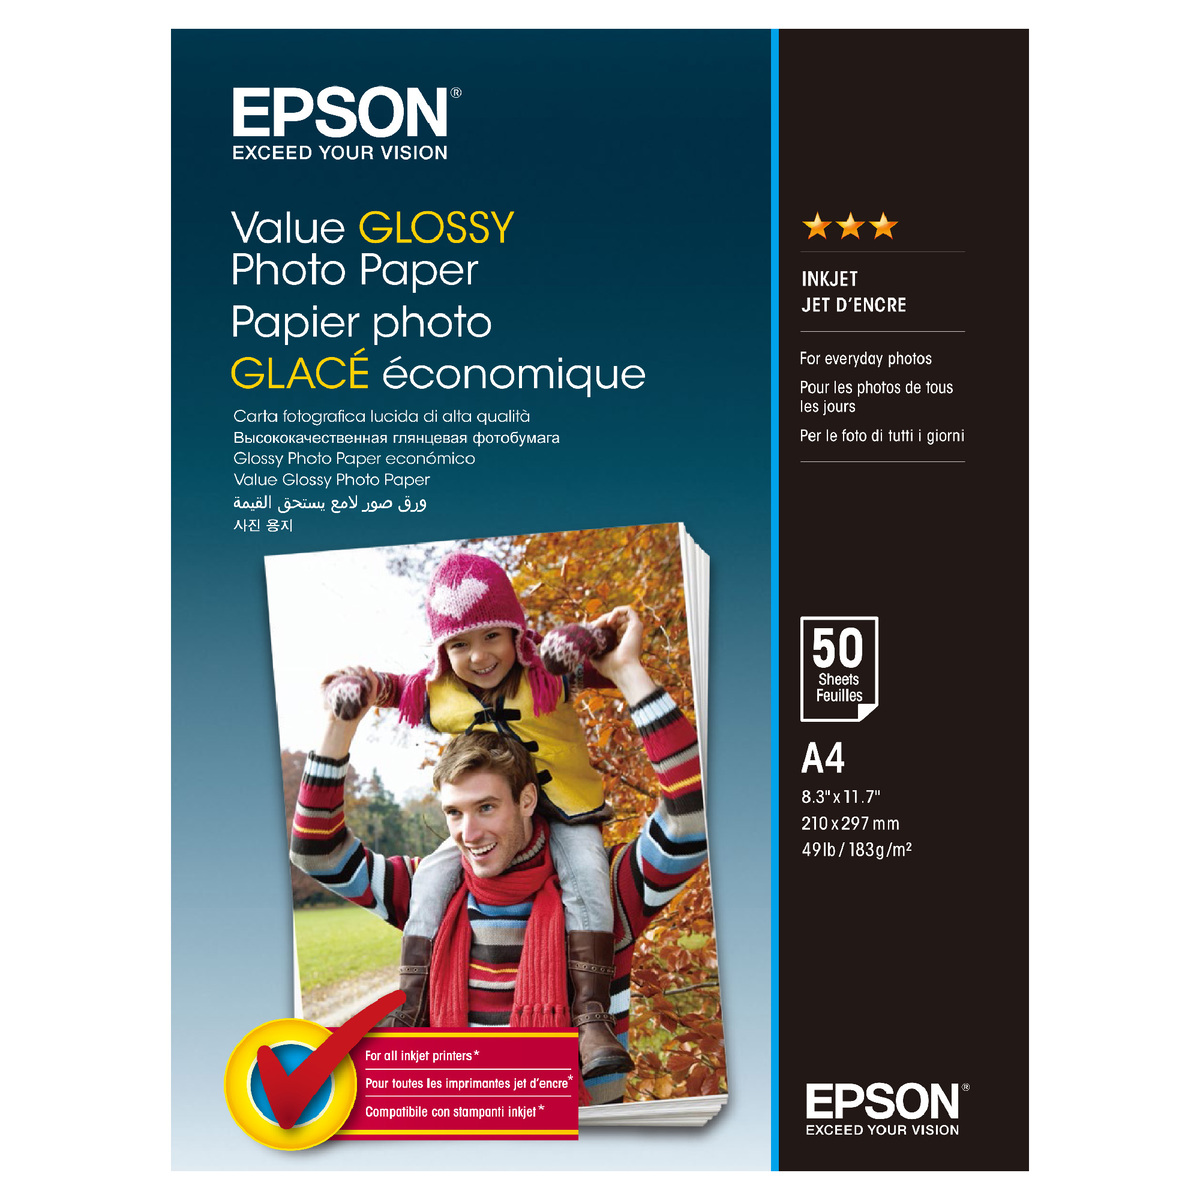 Epson Value Glossy Photo Paper, A4 Size, 20 sheets, C13S400035